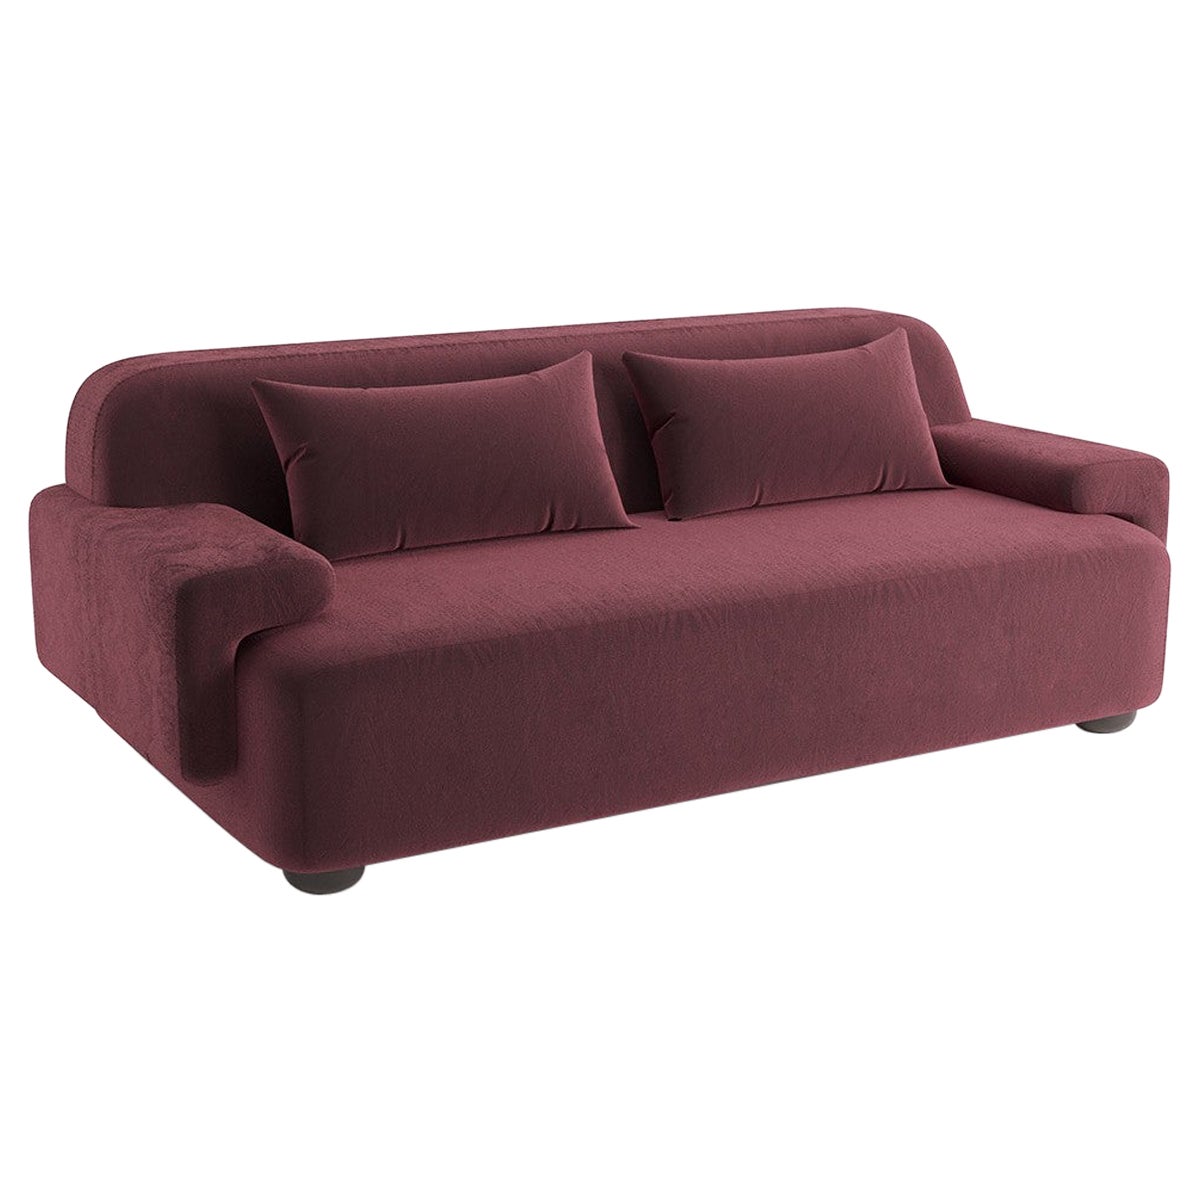 Popus Editions Lena 2.5 Seater Sofa in Red Como Velvet Upholstery